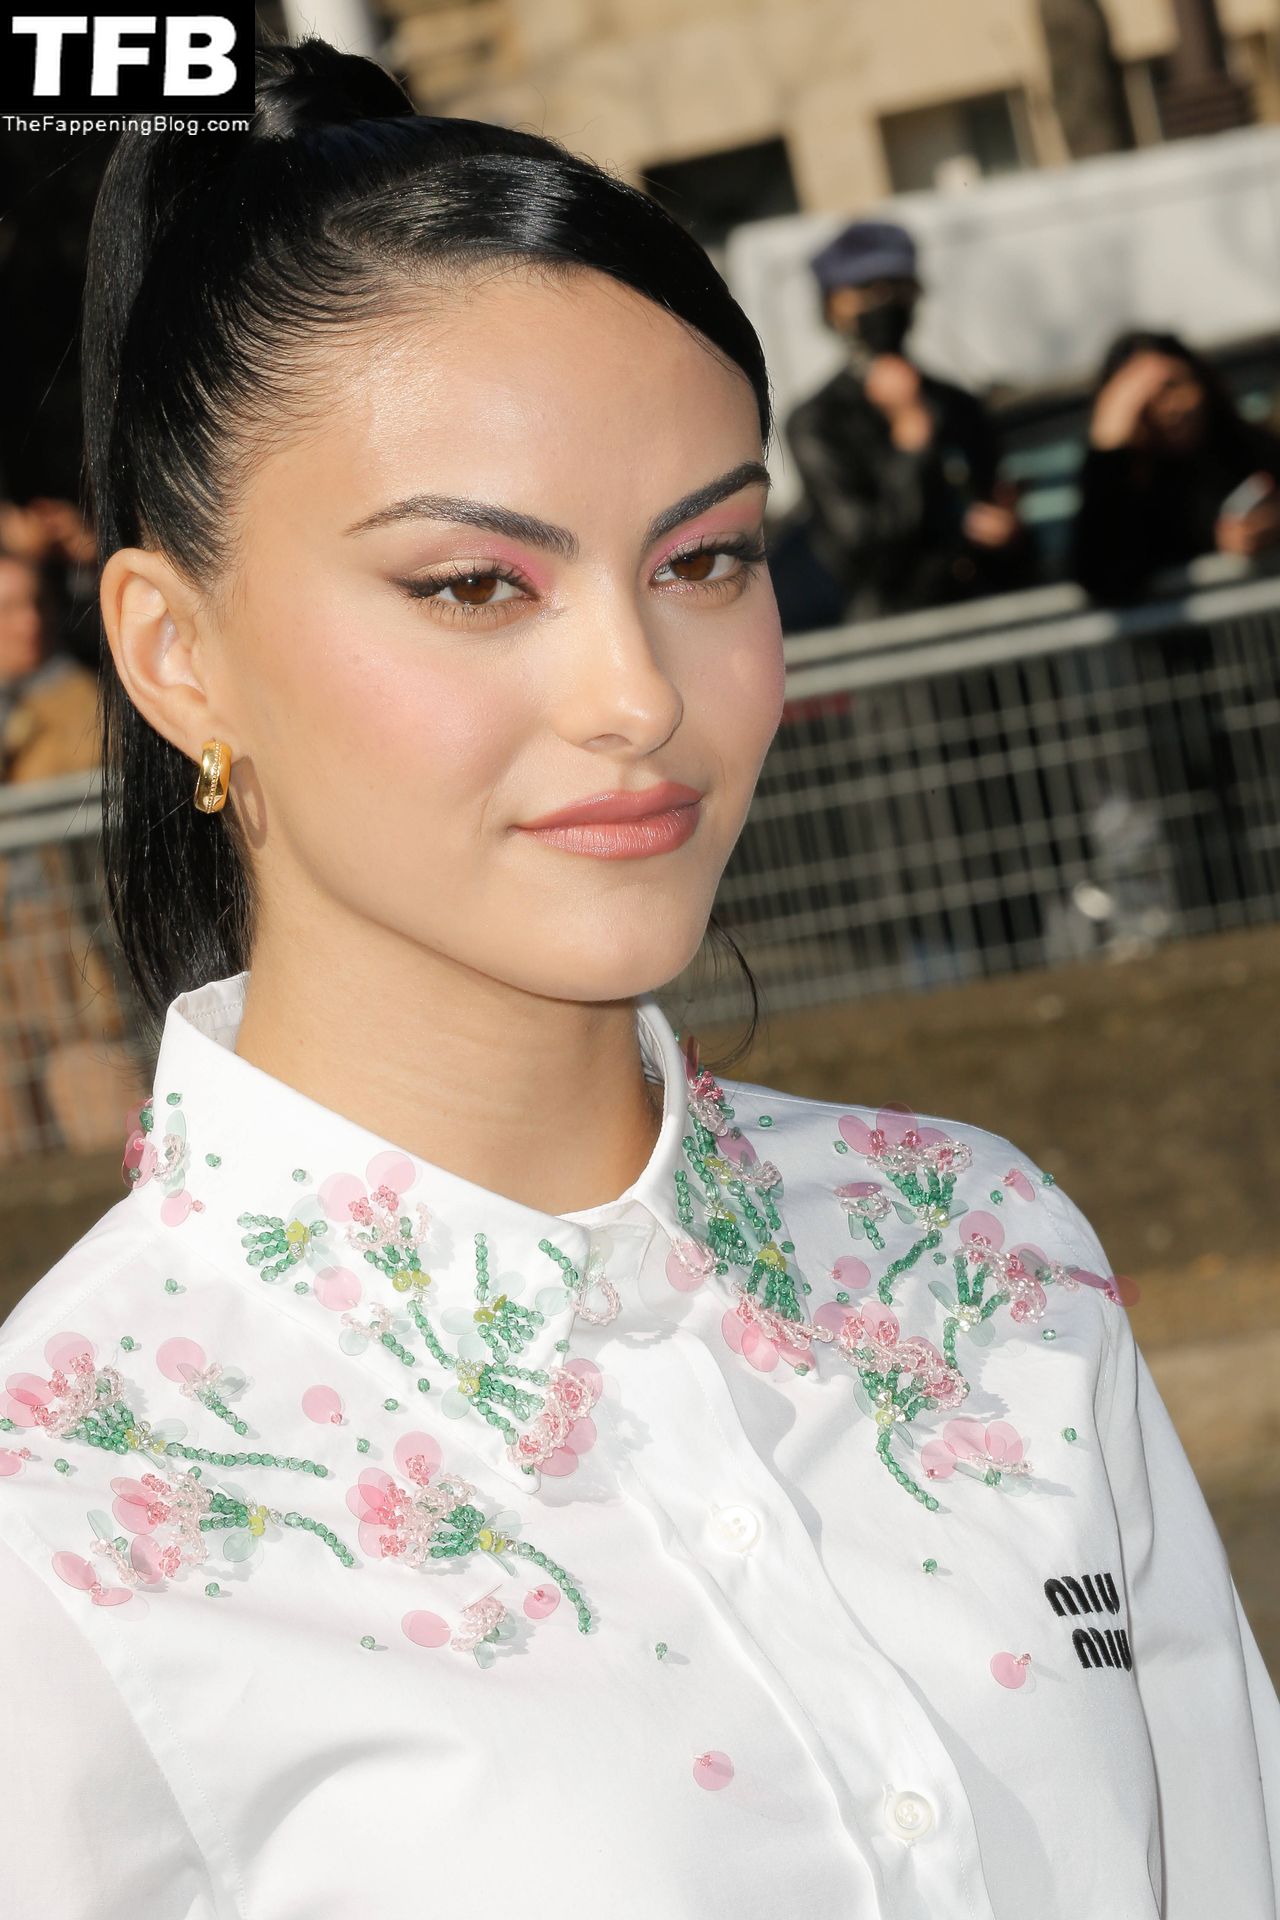 Camila-Mendes-Sexy-The-Fappening-Blog-21.jpg